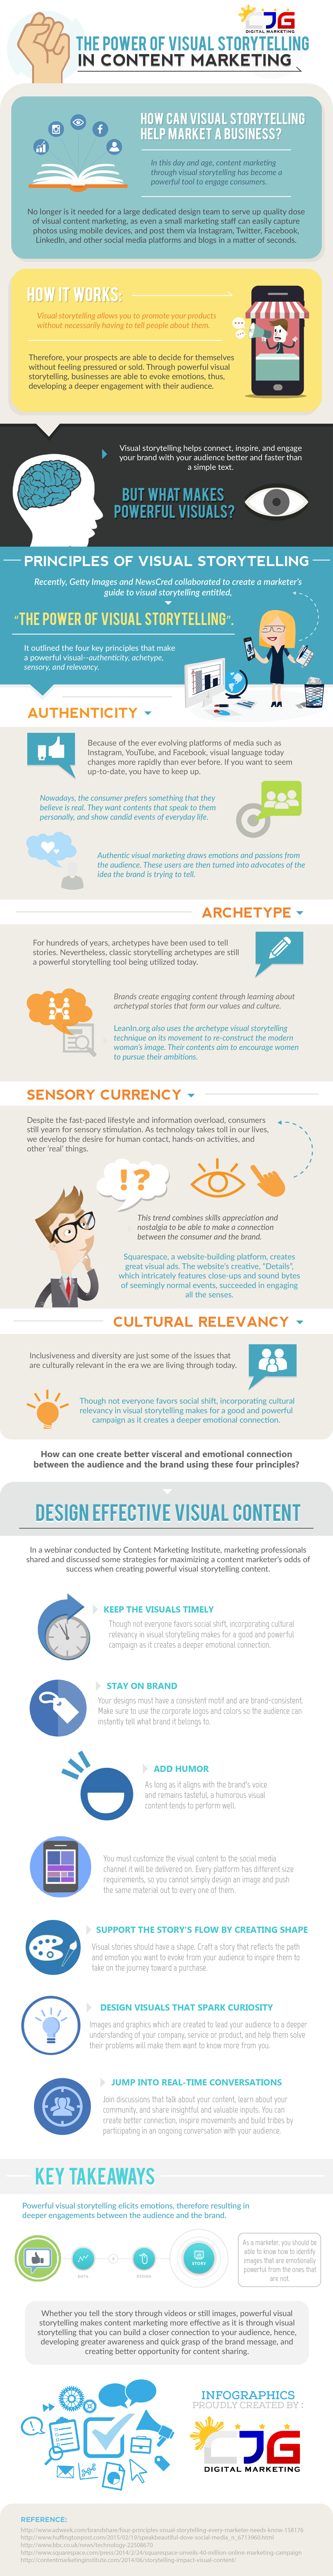 The-Power-of-Visual-Storytelling-in-Content-Marketing